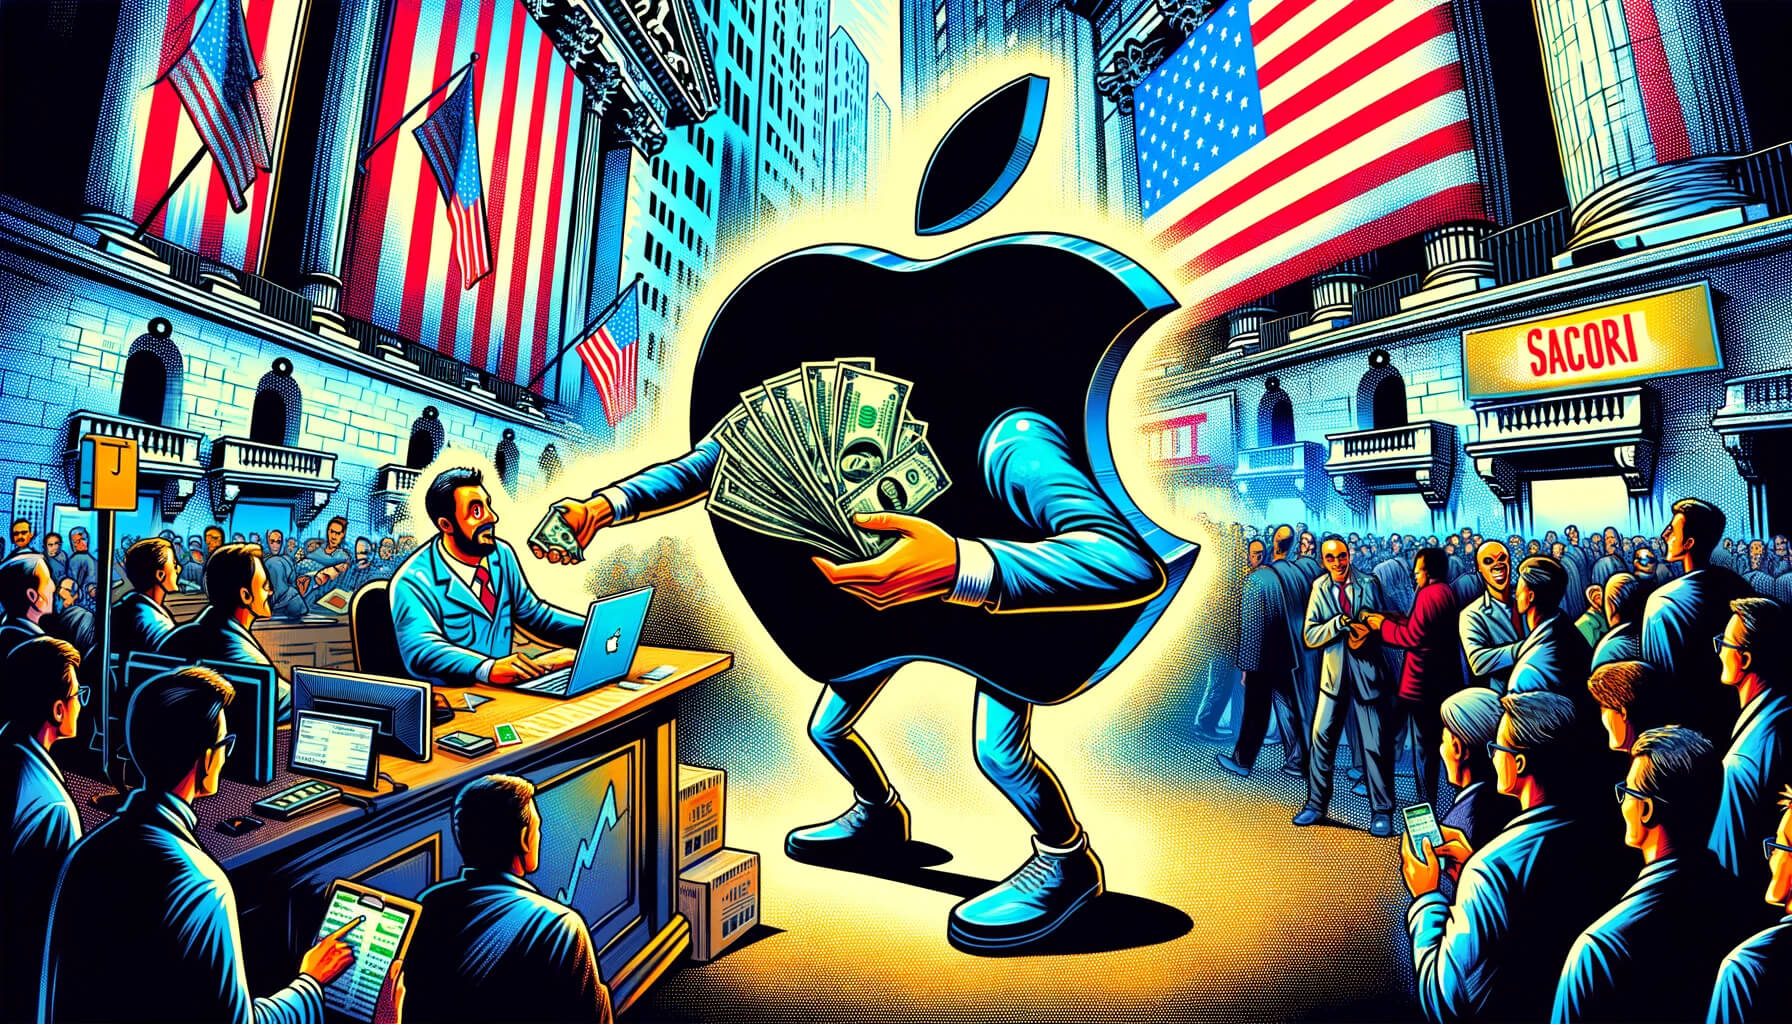 Apple Historic $110 Billion Buyback Post Strong Q2 Results